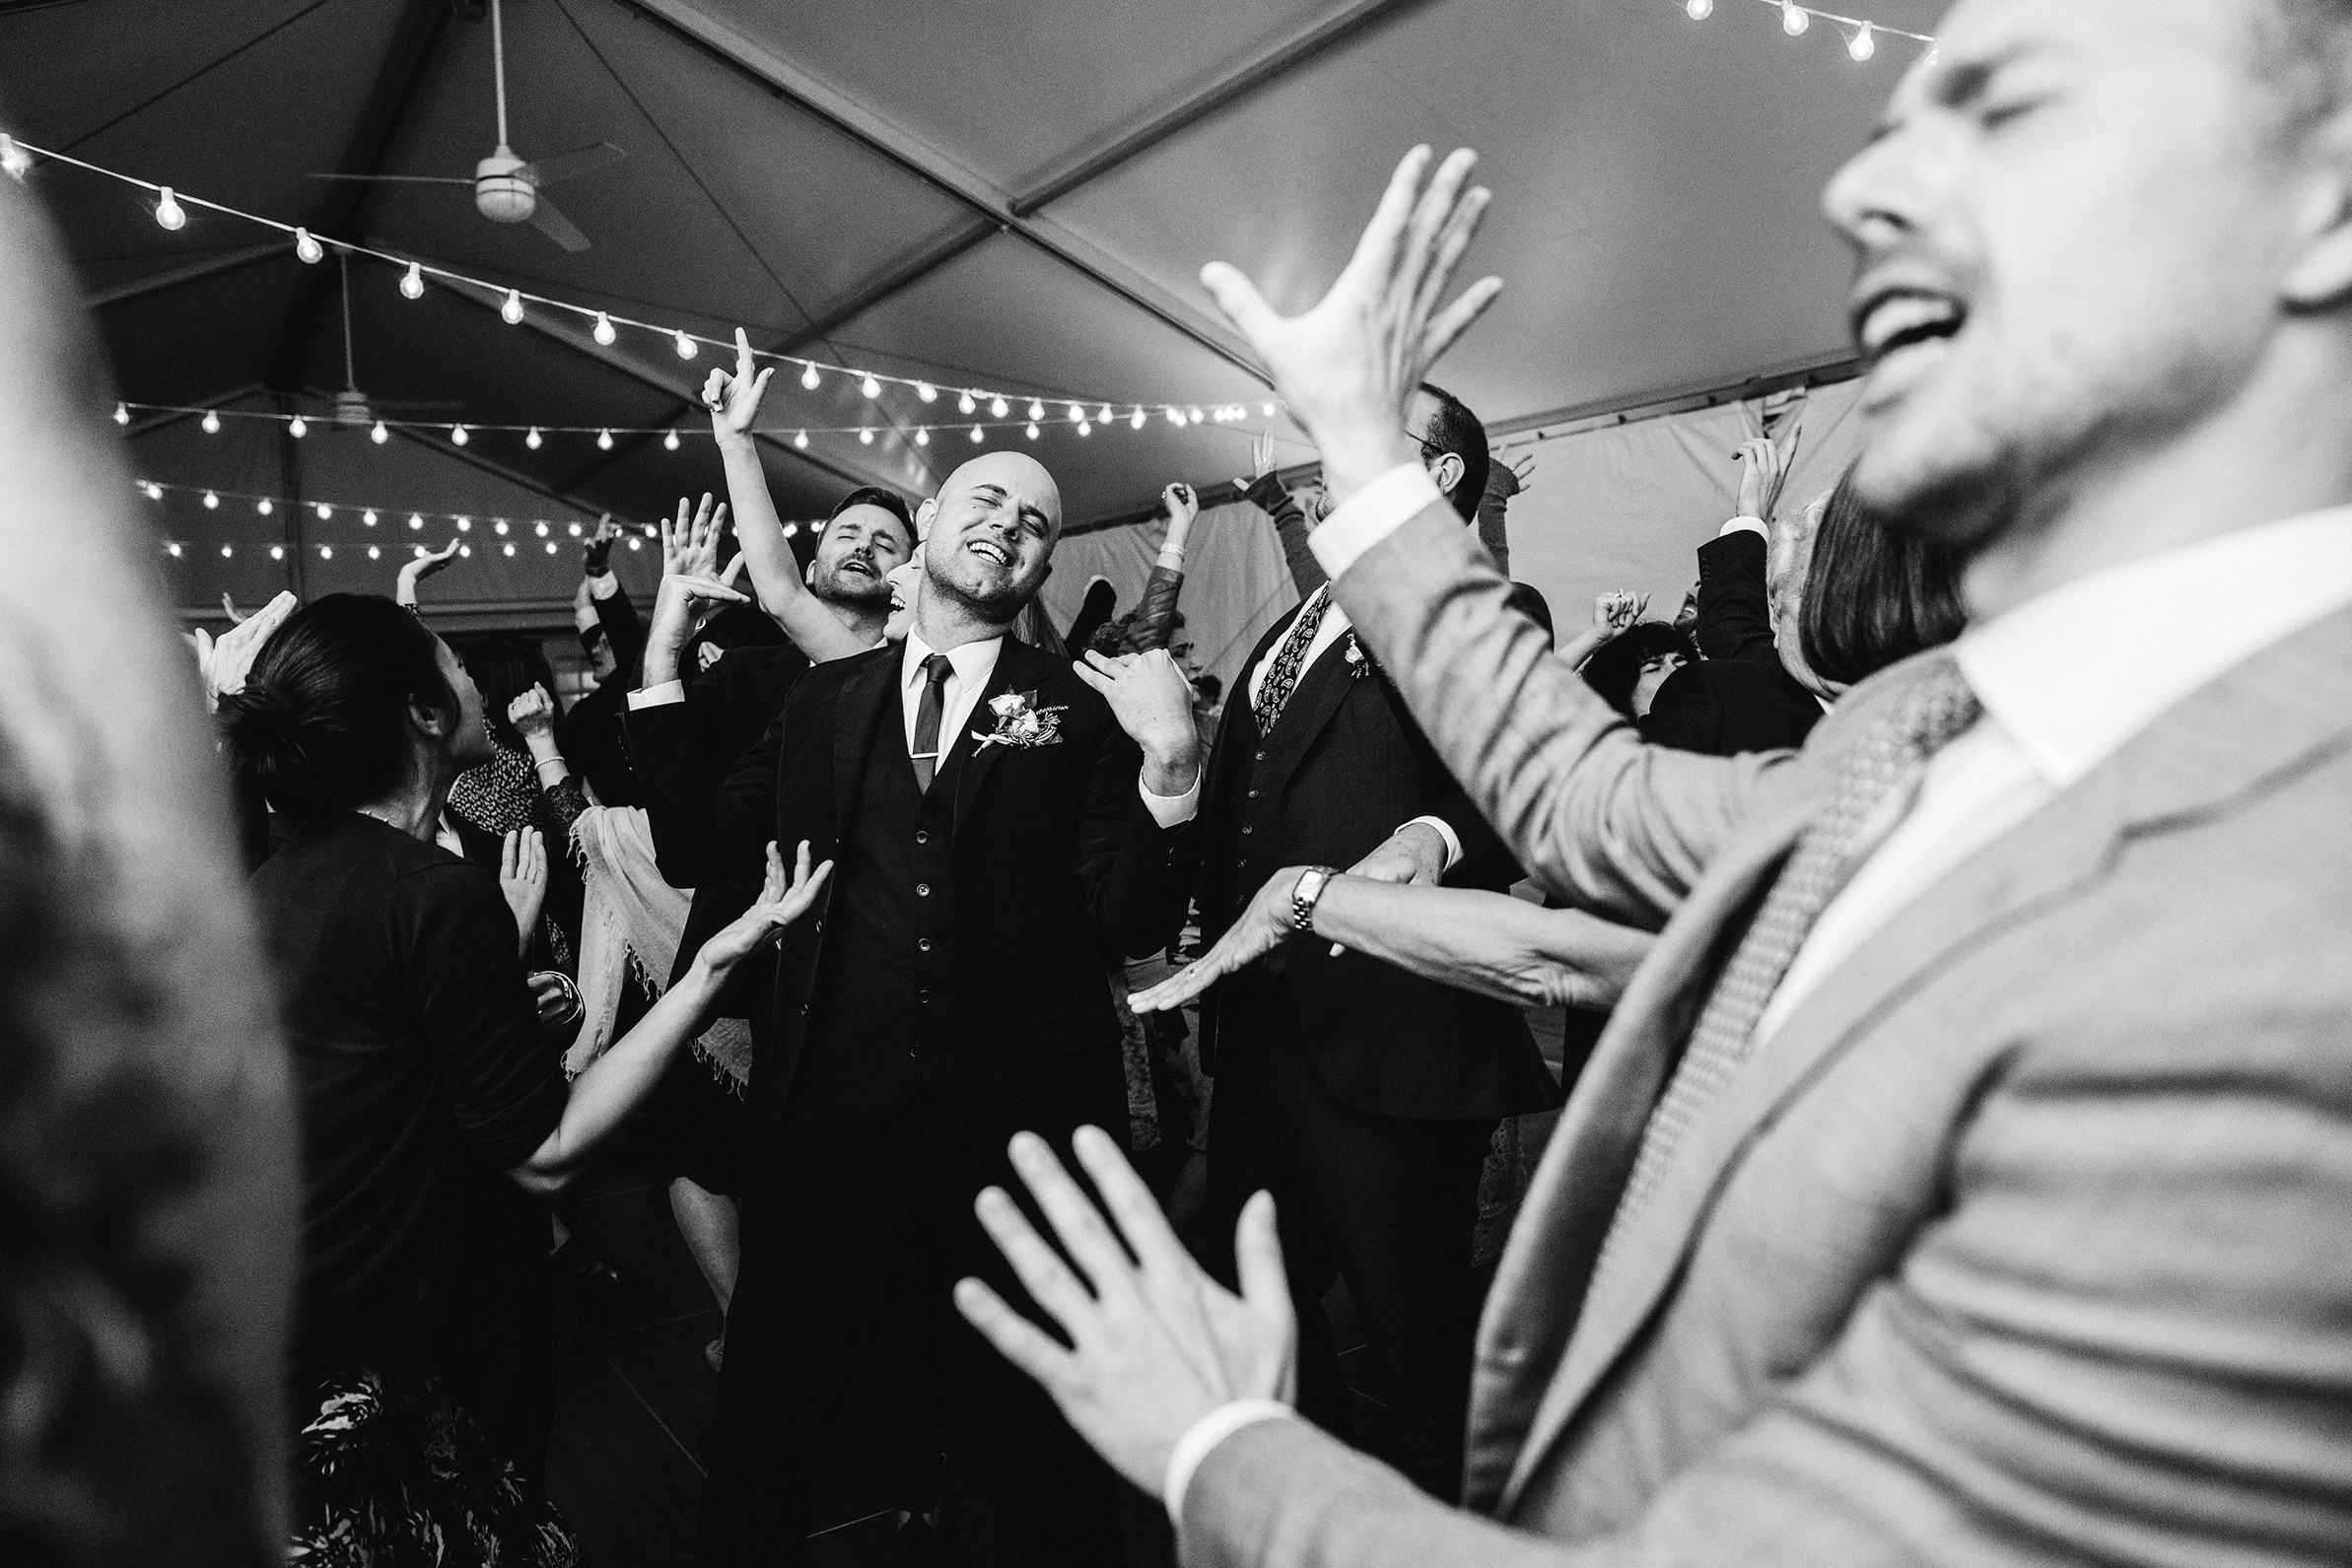 A documentary photograph featured in the best of wedding photography of 2019 showing guests dancing